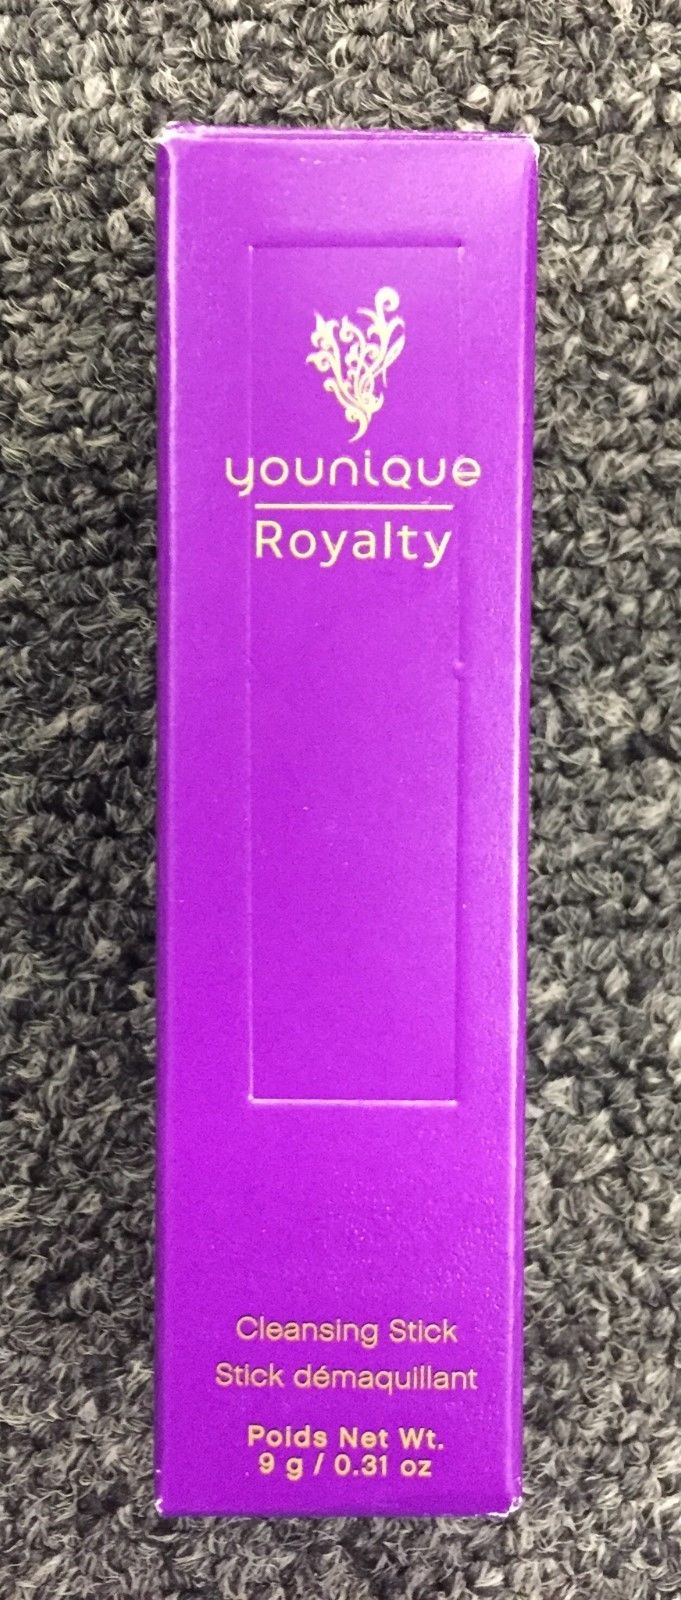 YOUNIQUE Royalty Cleansing Stick NEW!